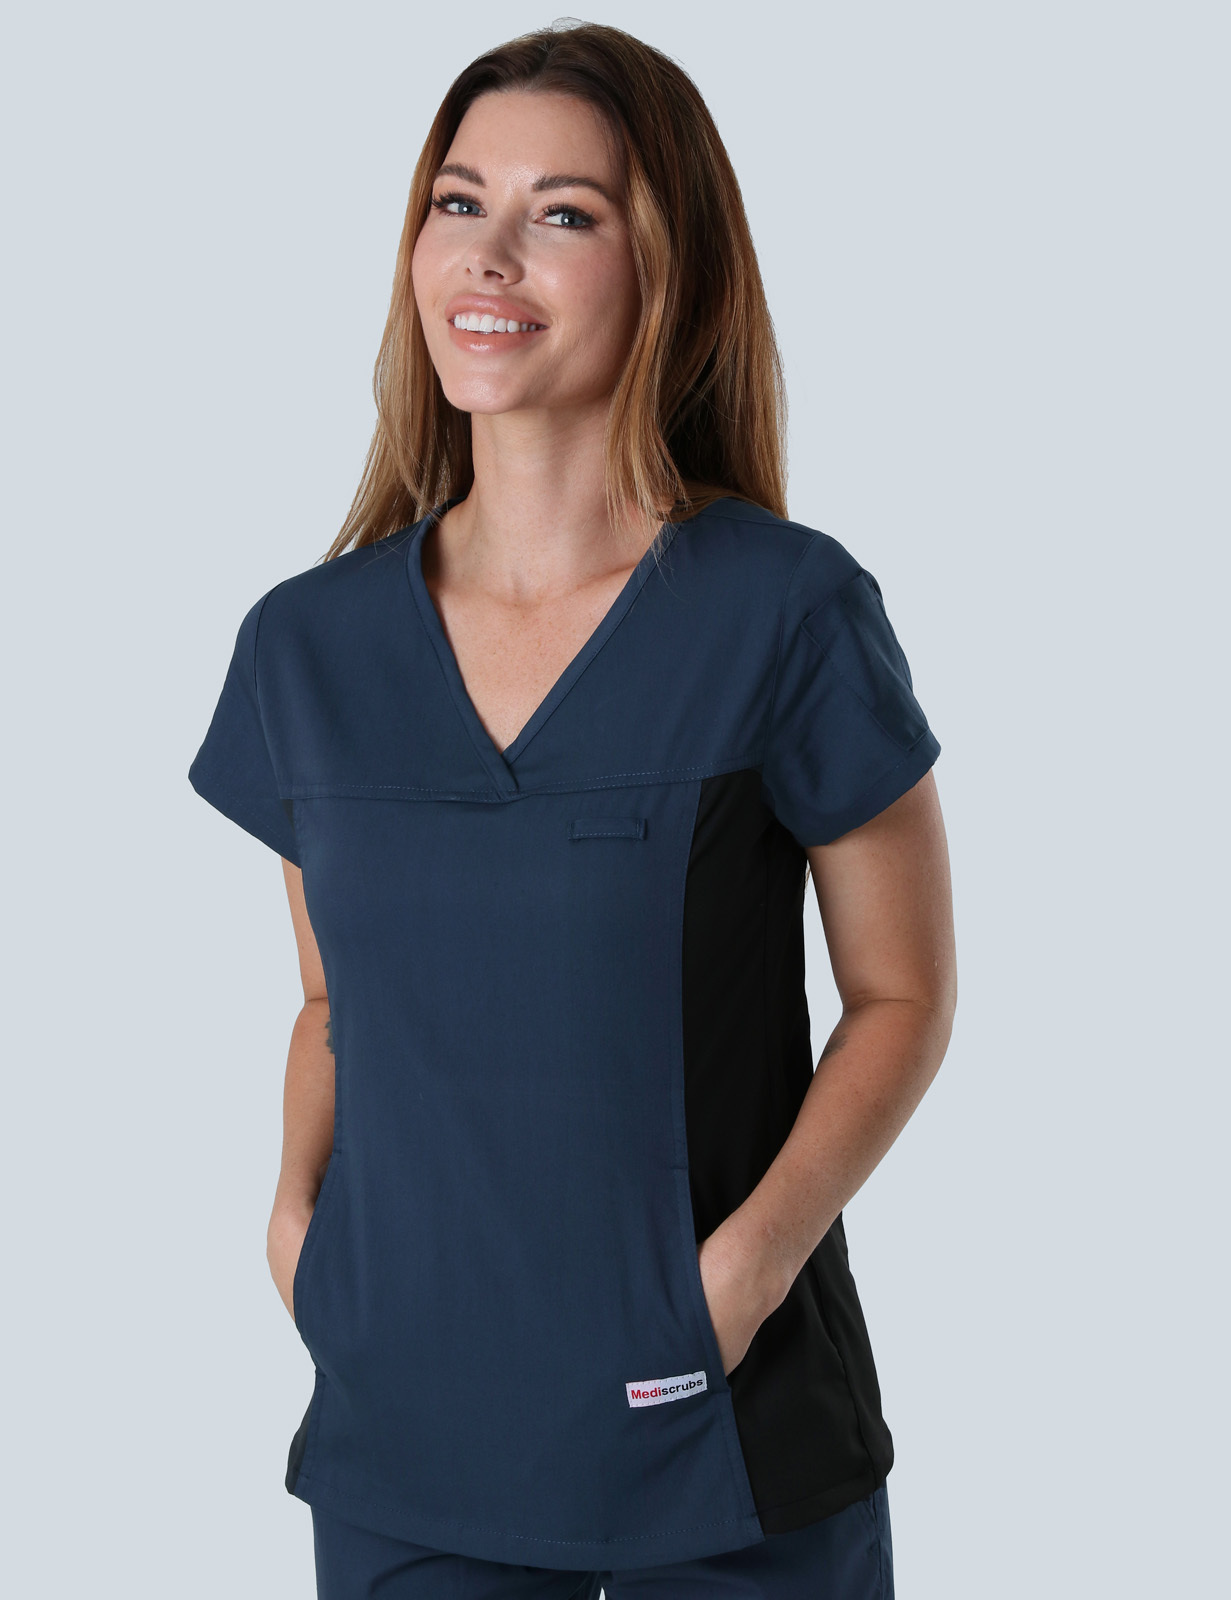 KnG Healthcare - Navy Women's Fit Spandex Top